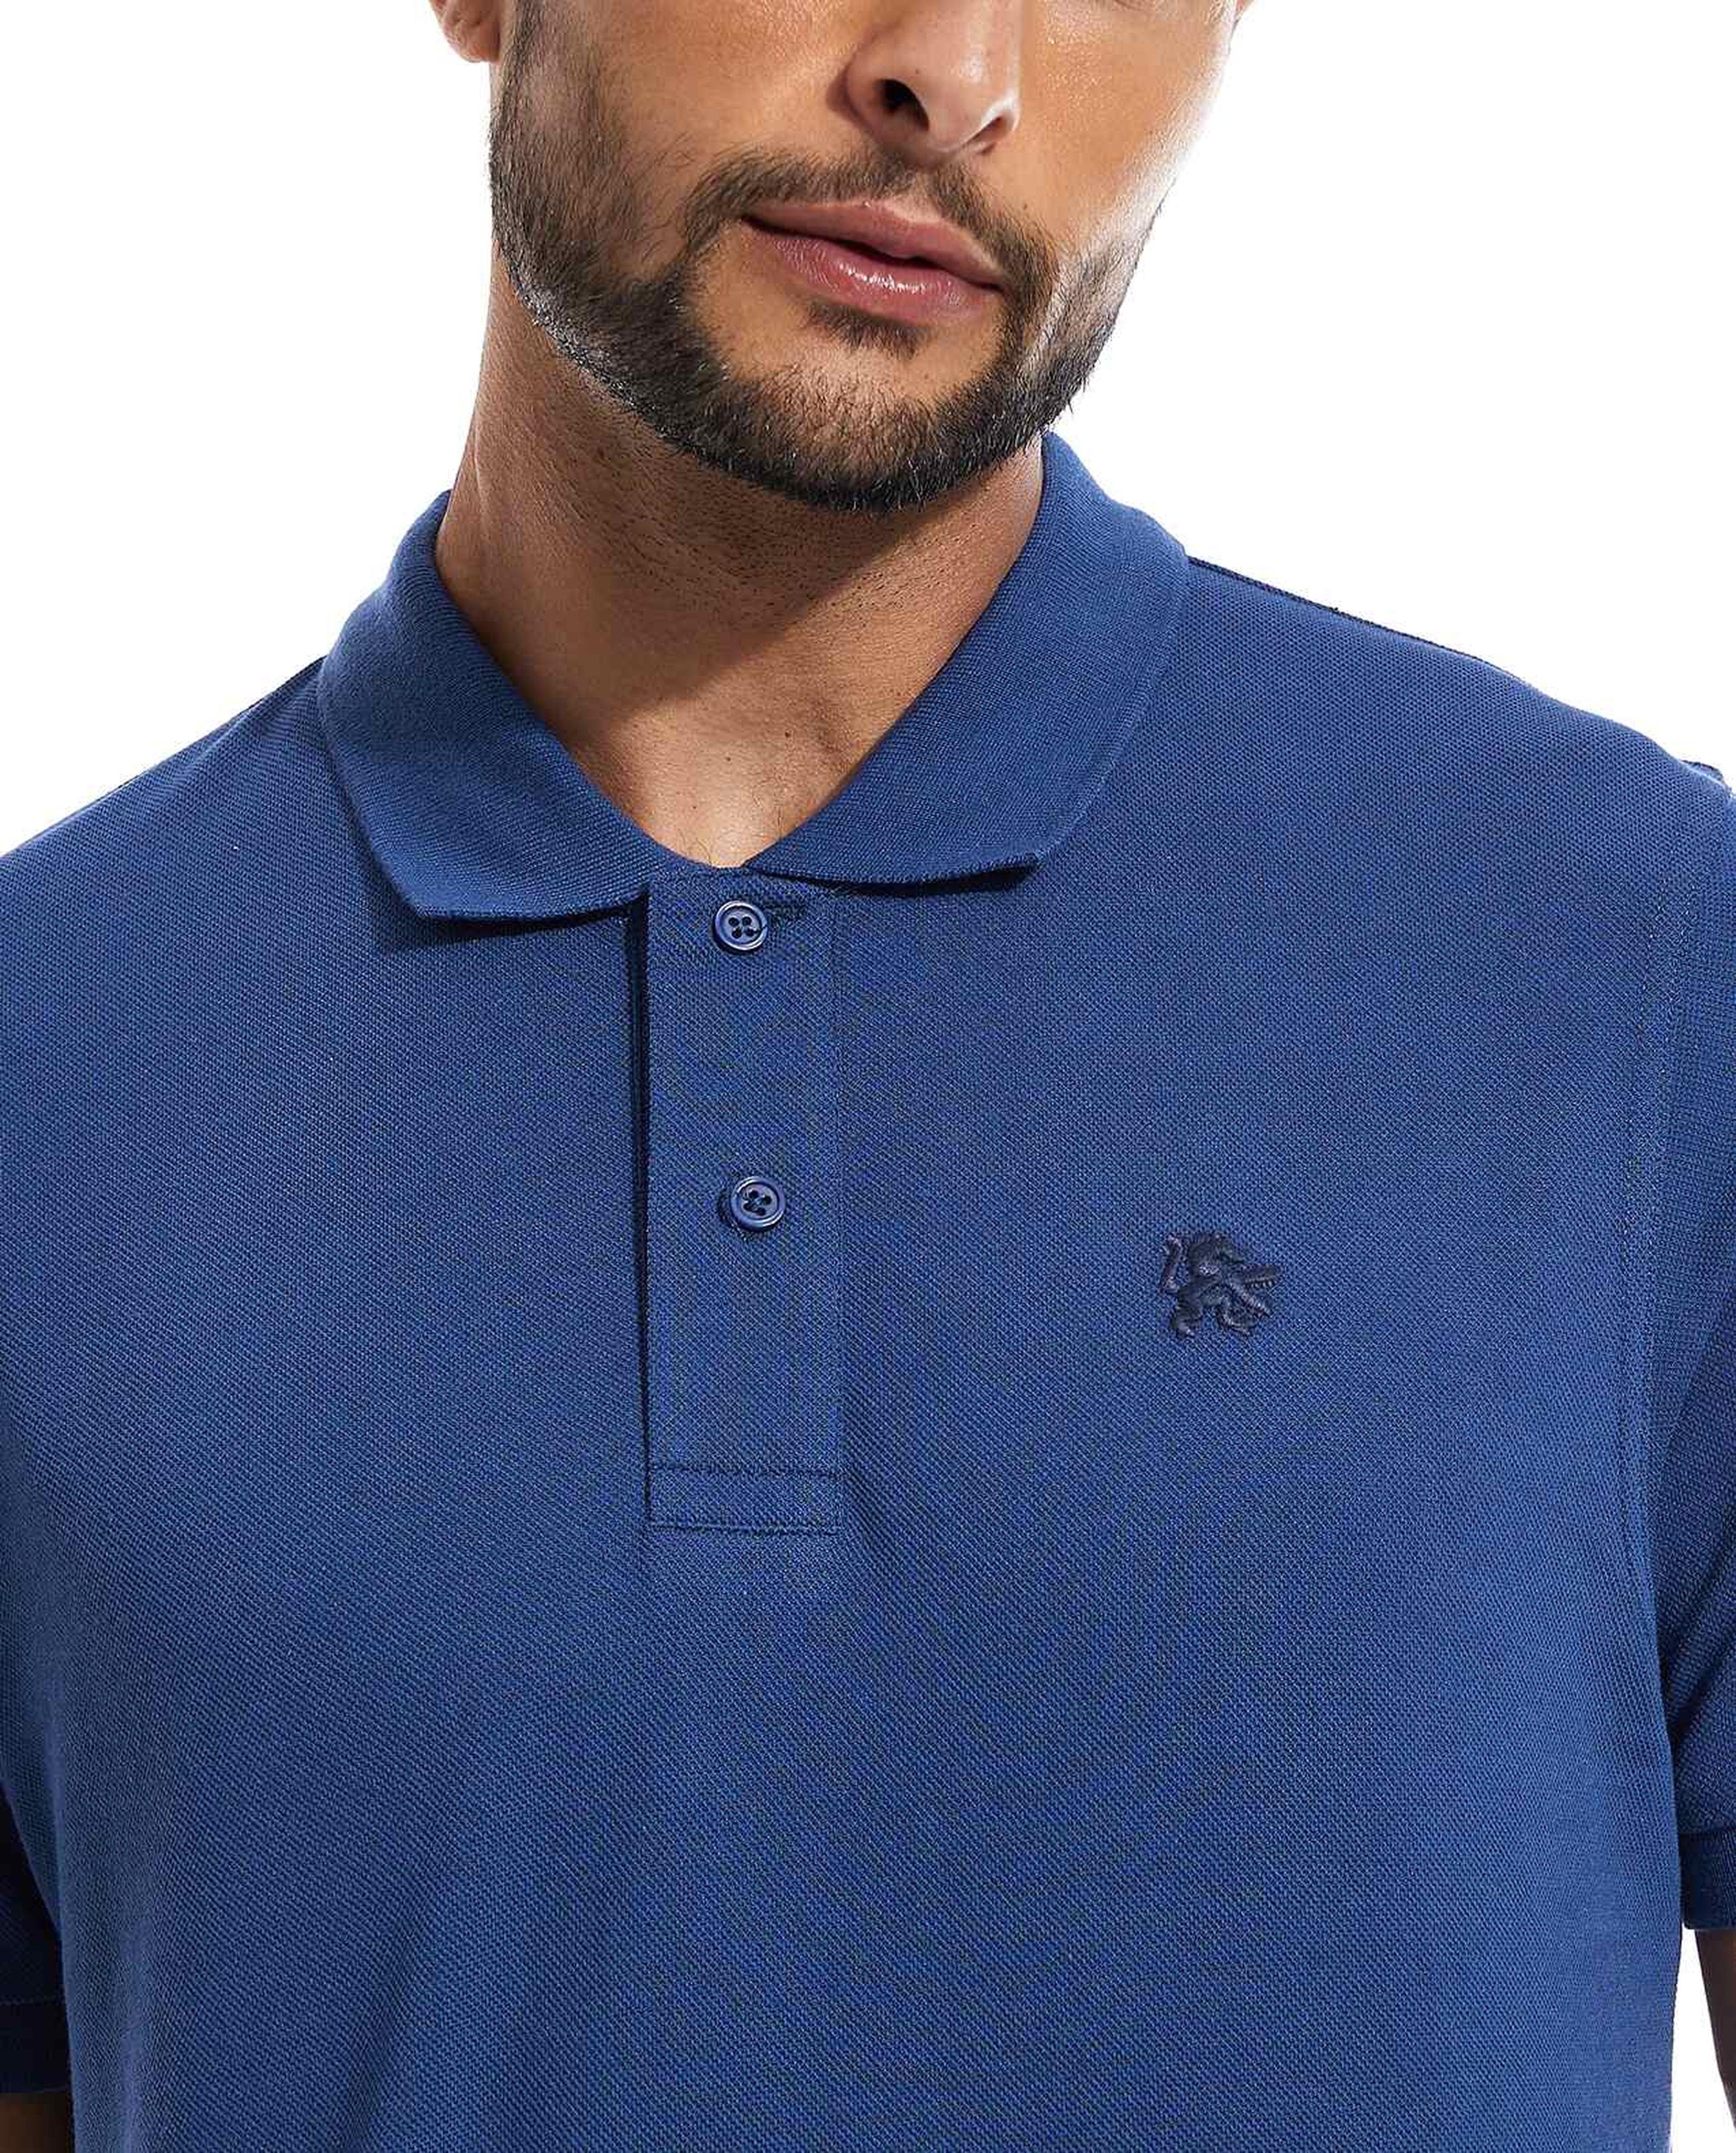 Logo Detail Polo T-Shirt with Short Sleeves